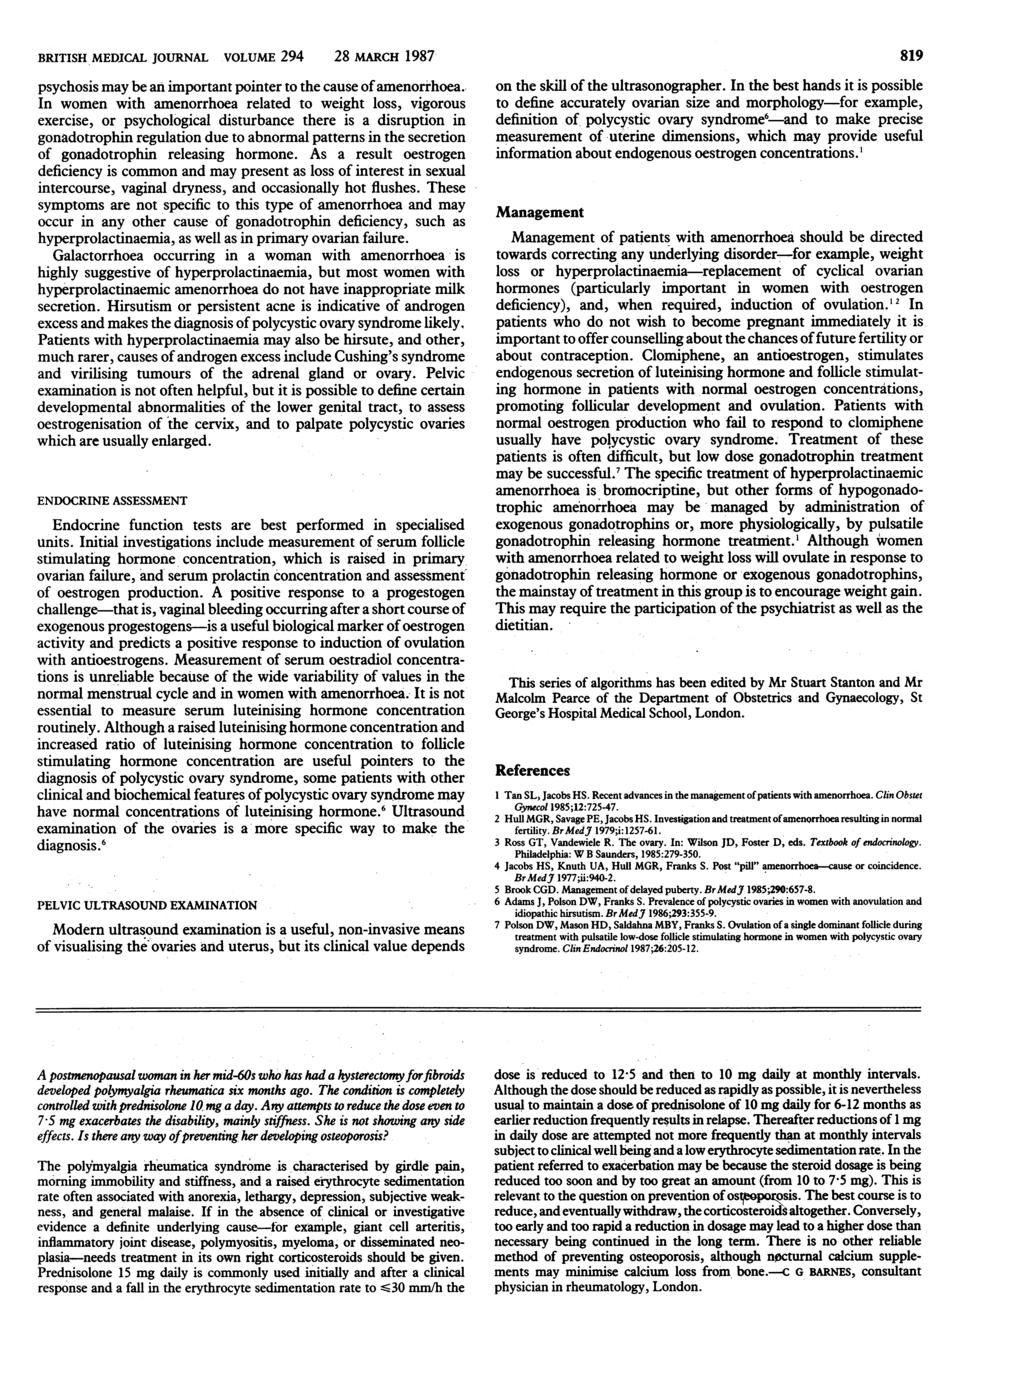 BRITISH MEDICAL JOURNAL VOLUME 294 28 MARCH 1987 819 psychosis may be an important pointer to the cause ofamenorrhoea.